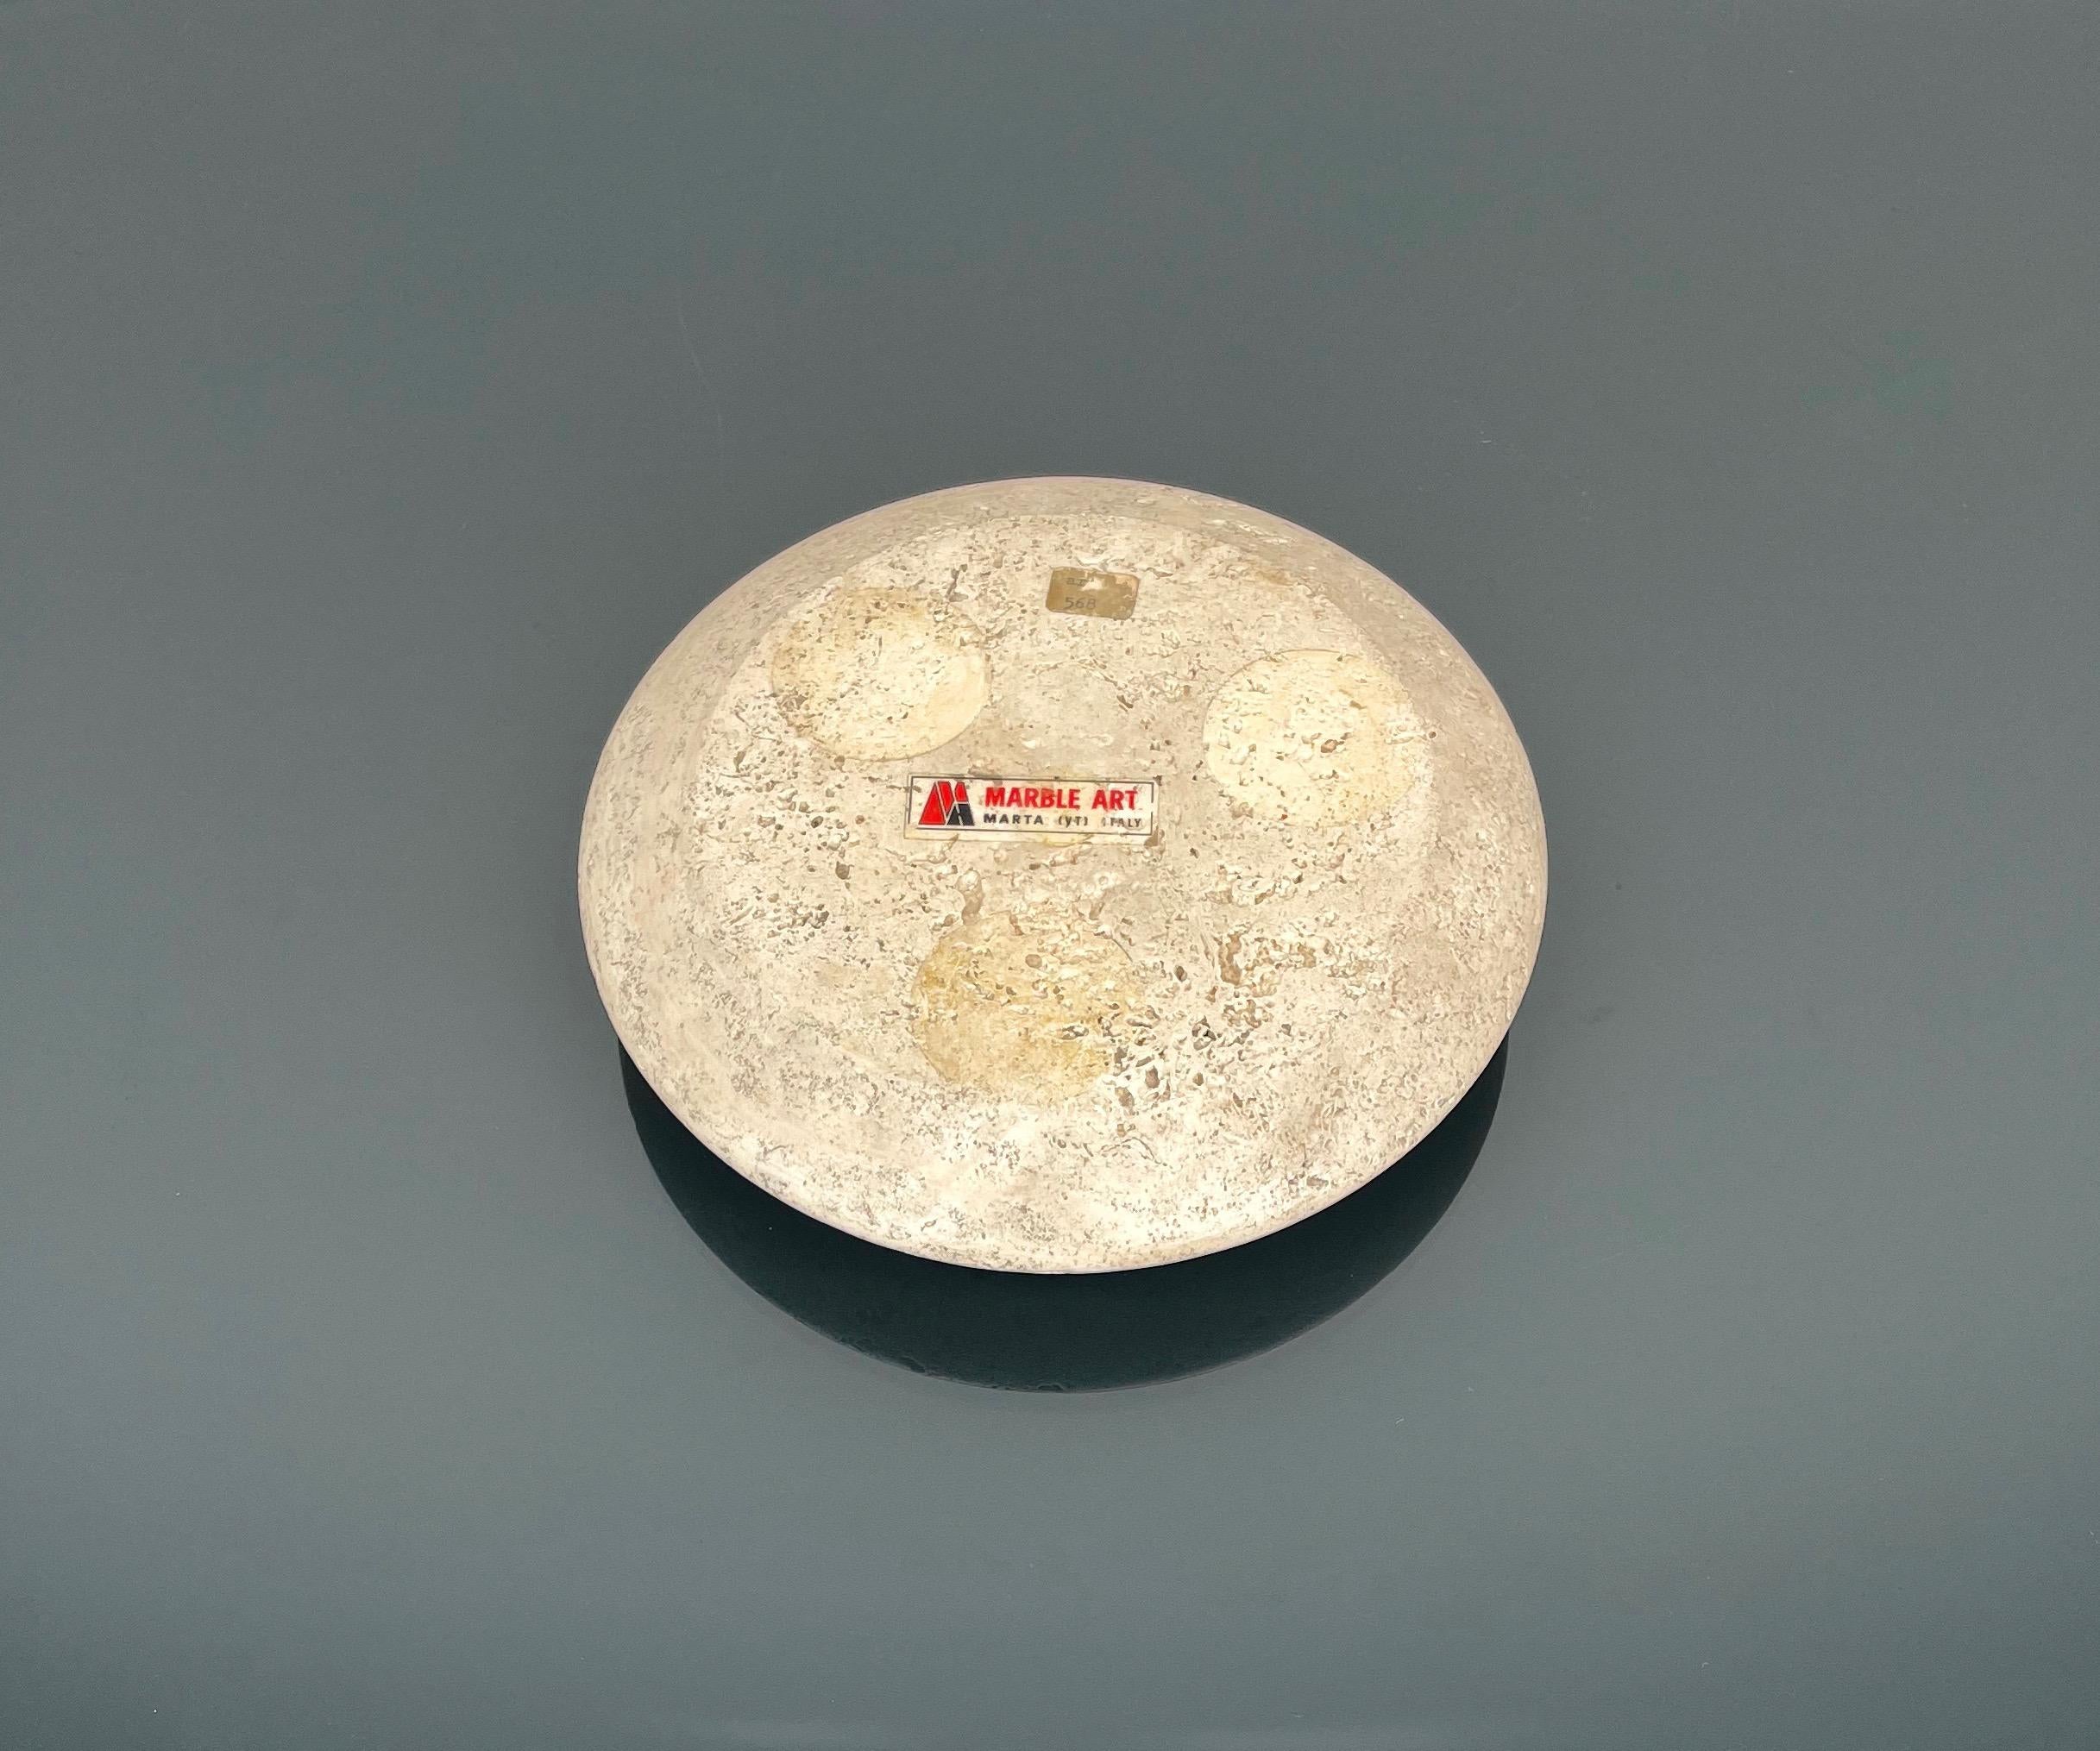 Metal Round Ashtray or Vide-Poche in Travertine and Steel by Marble Art, Italy 1970s For Sale